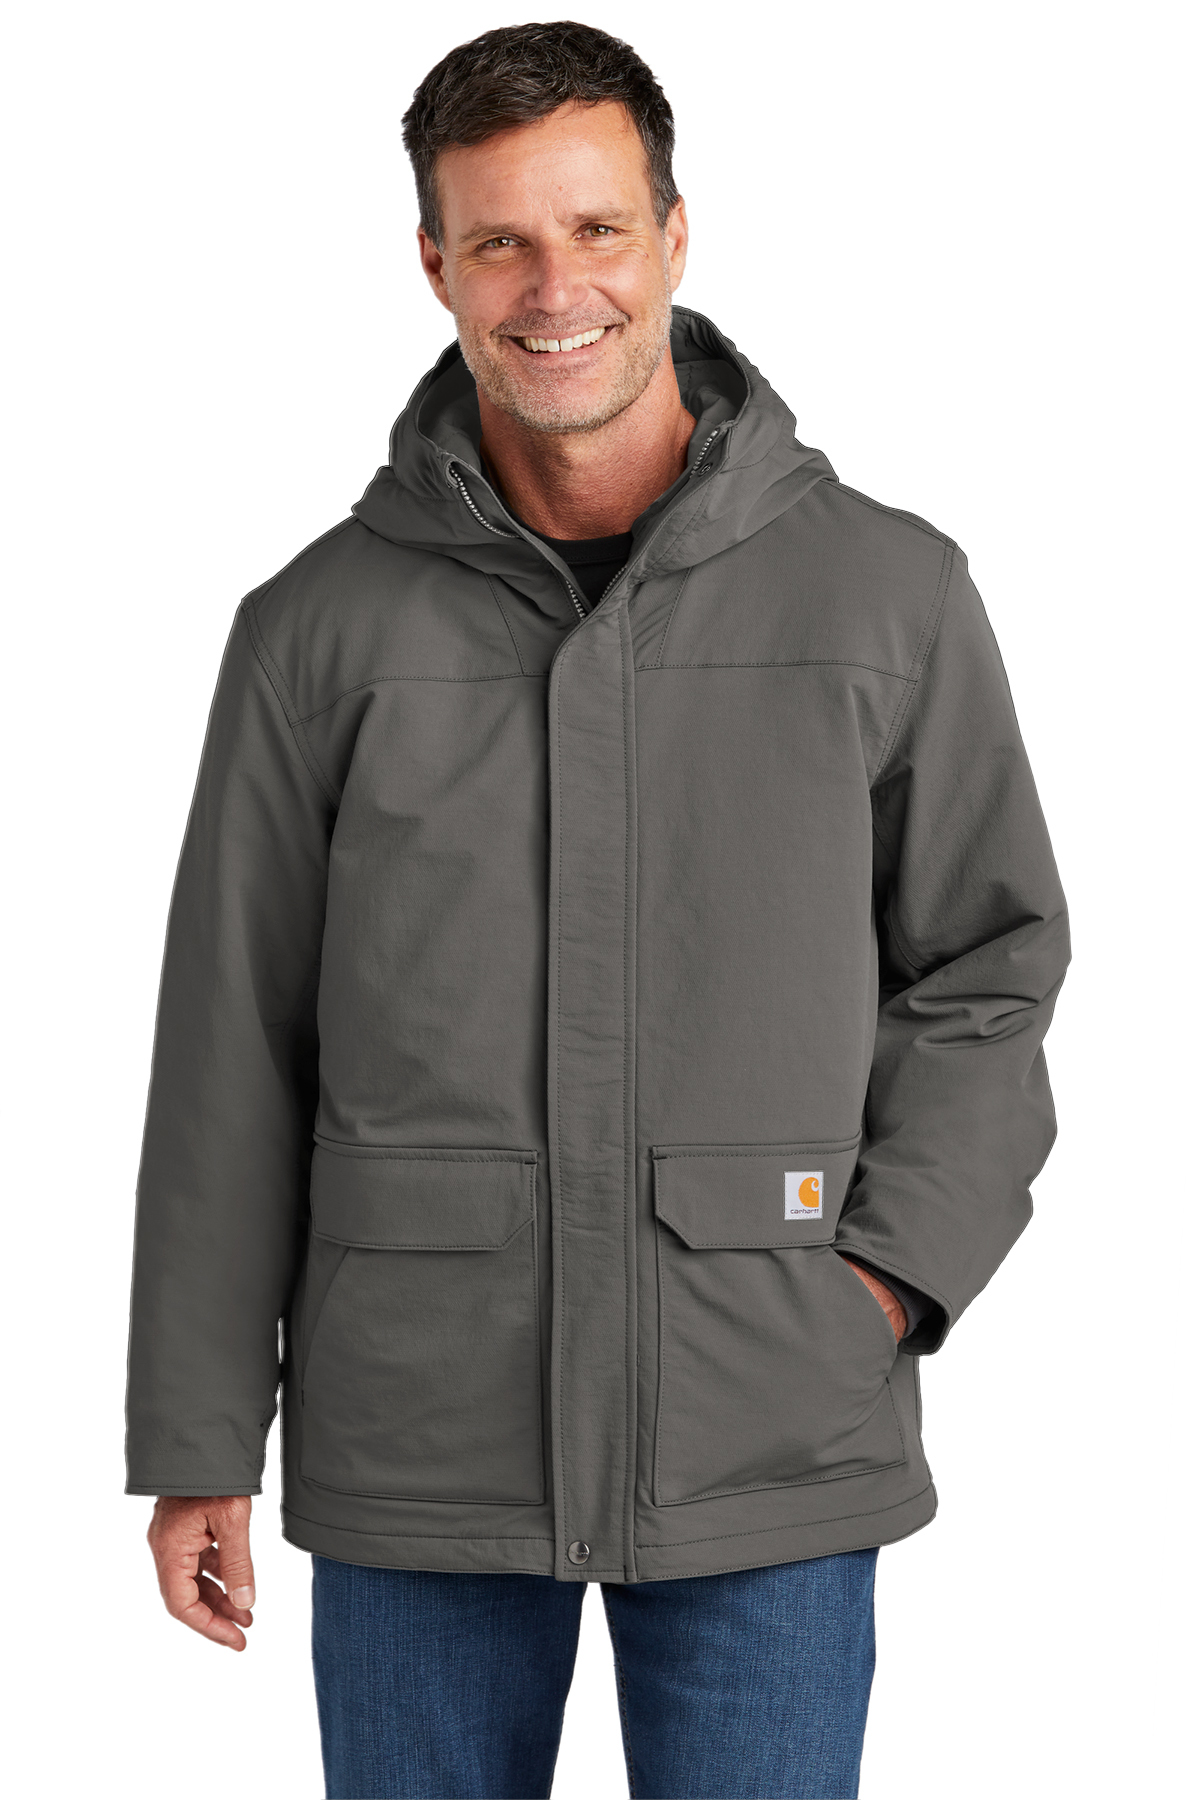 Carhartt Super Dux Insulated Hooded Coat, Product